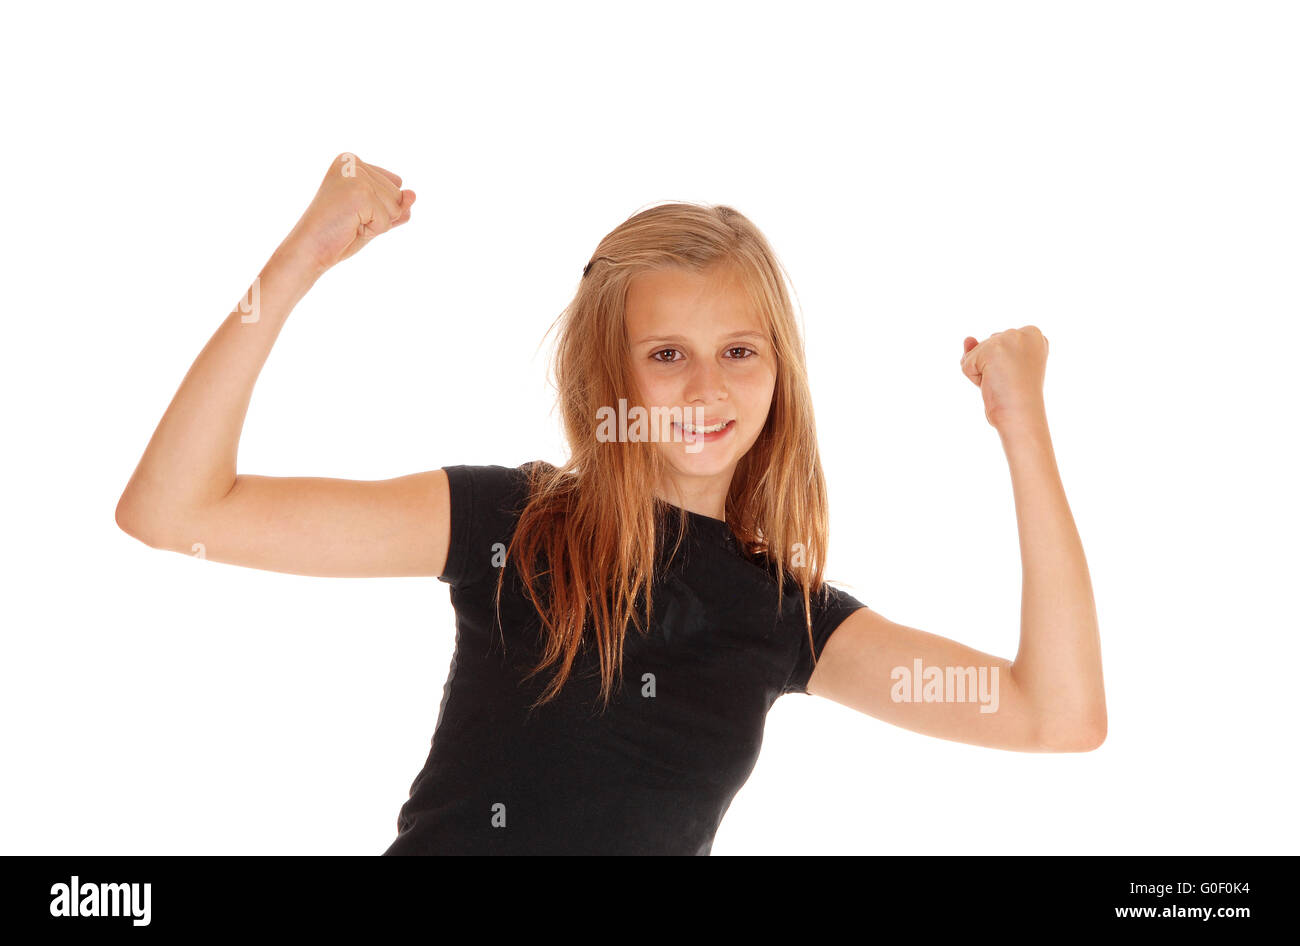 Happy young girl raising her arms. Stock Photo